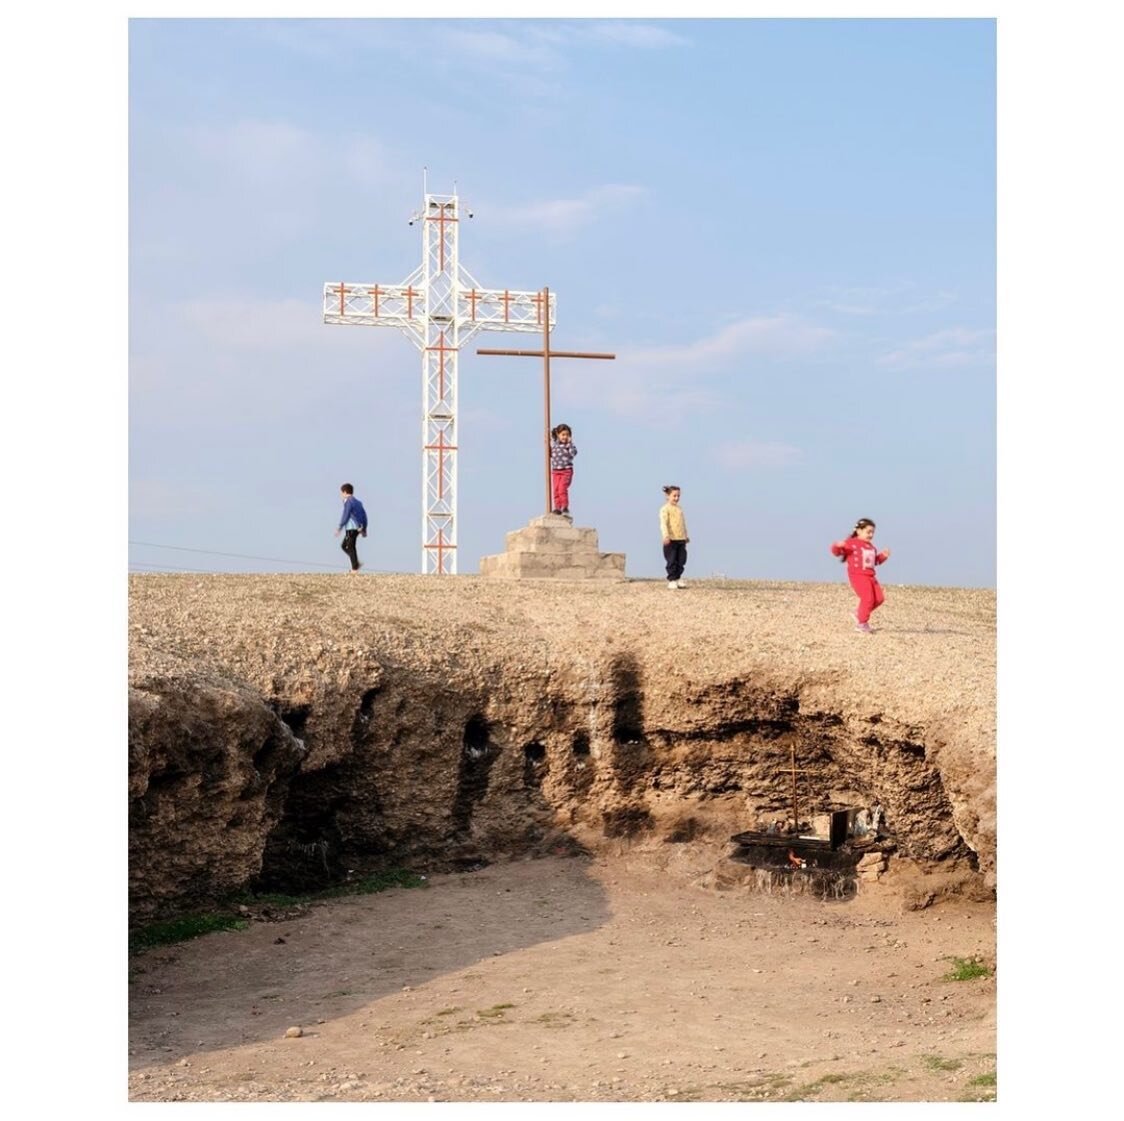 -
@lorenzo.meloni's work features the cover story of @lacroixinternational, which explores the influence of Christianity in Mosul and Northern Iraq, ahead of Pope Francis&rsquo;s visit to the country. 
. 
The piece charts communities who have resettl